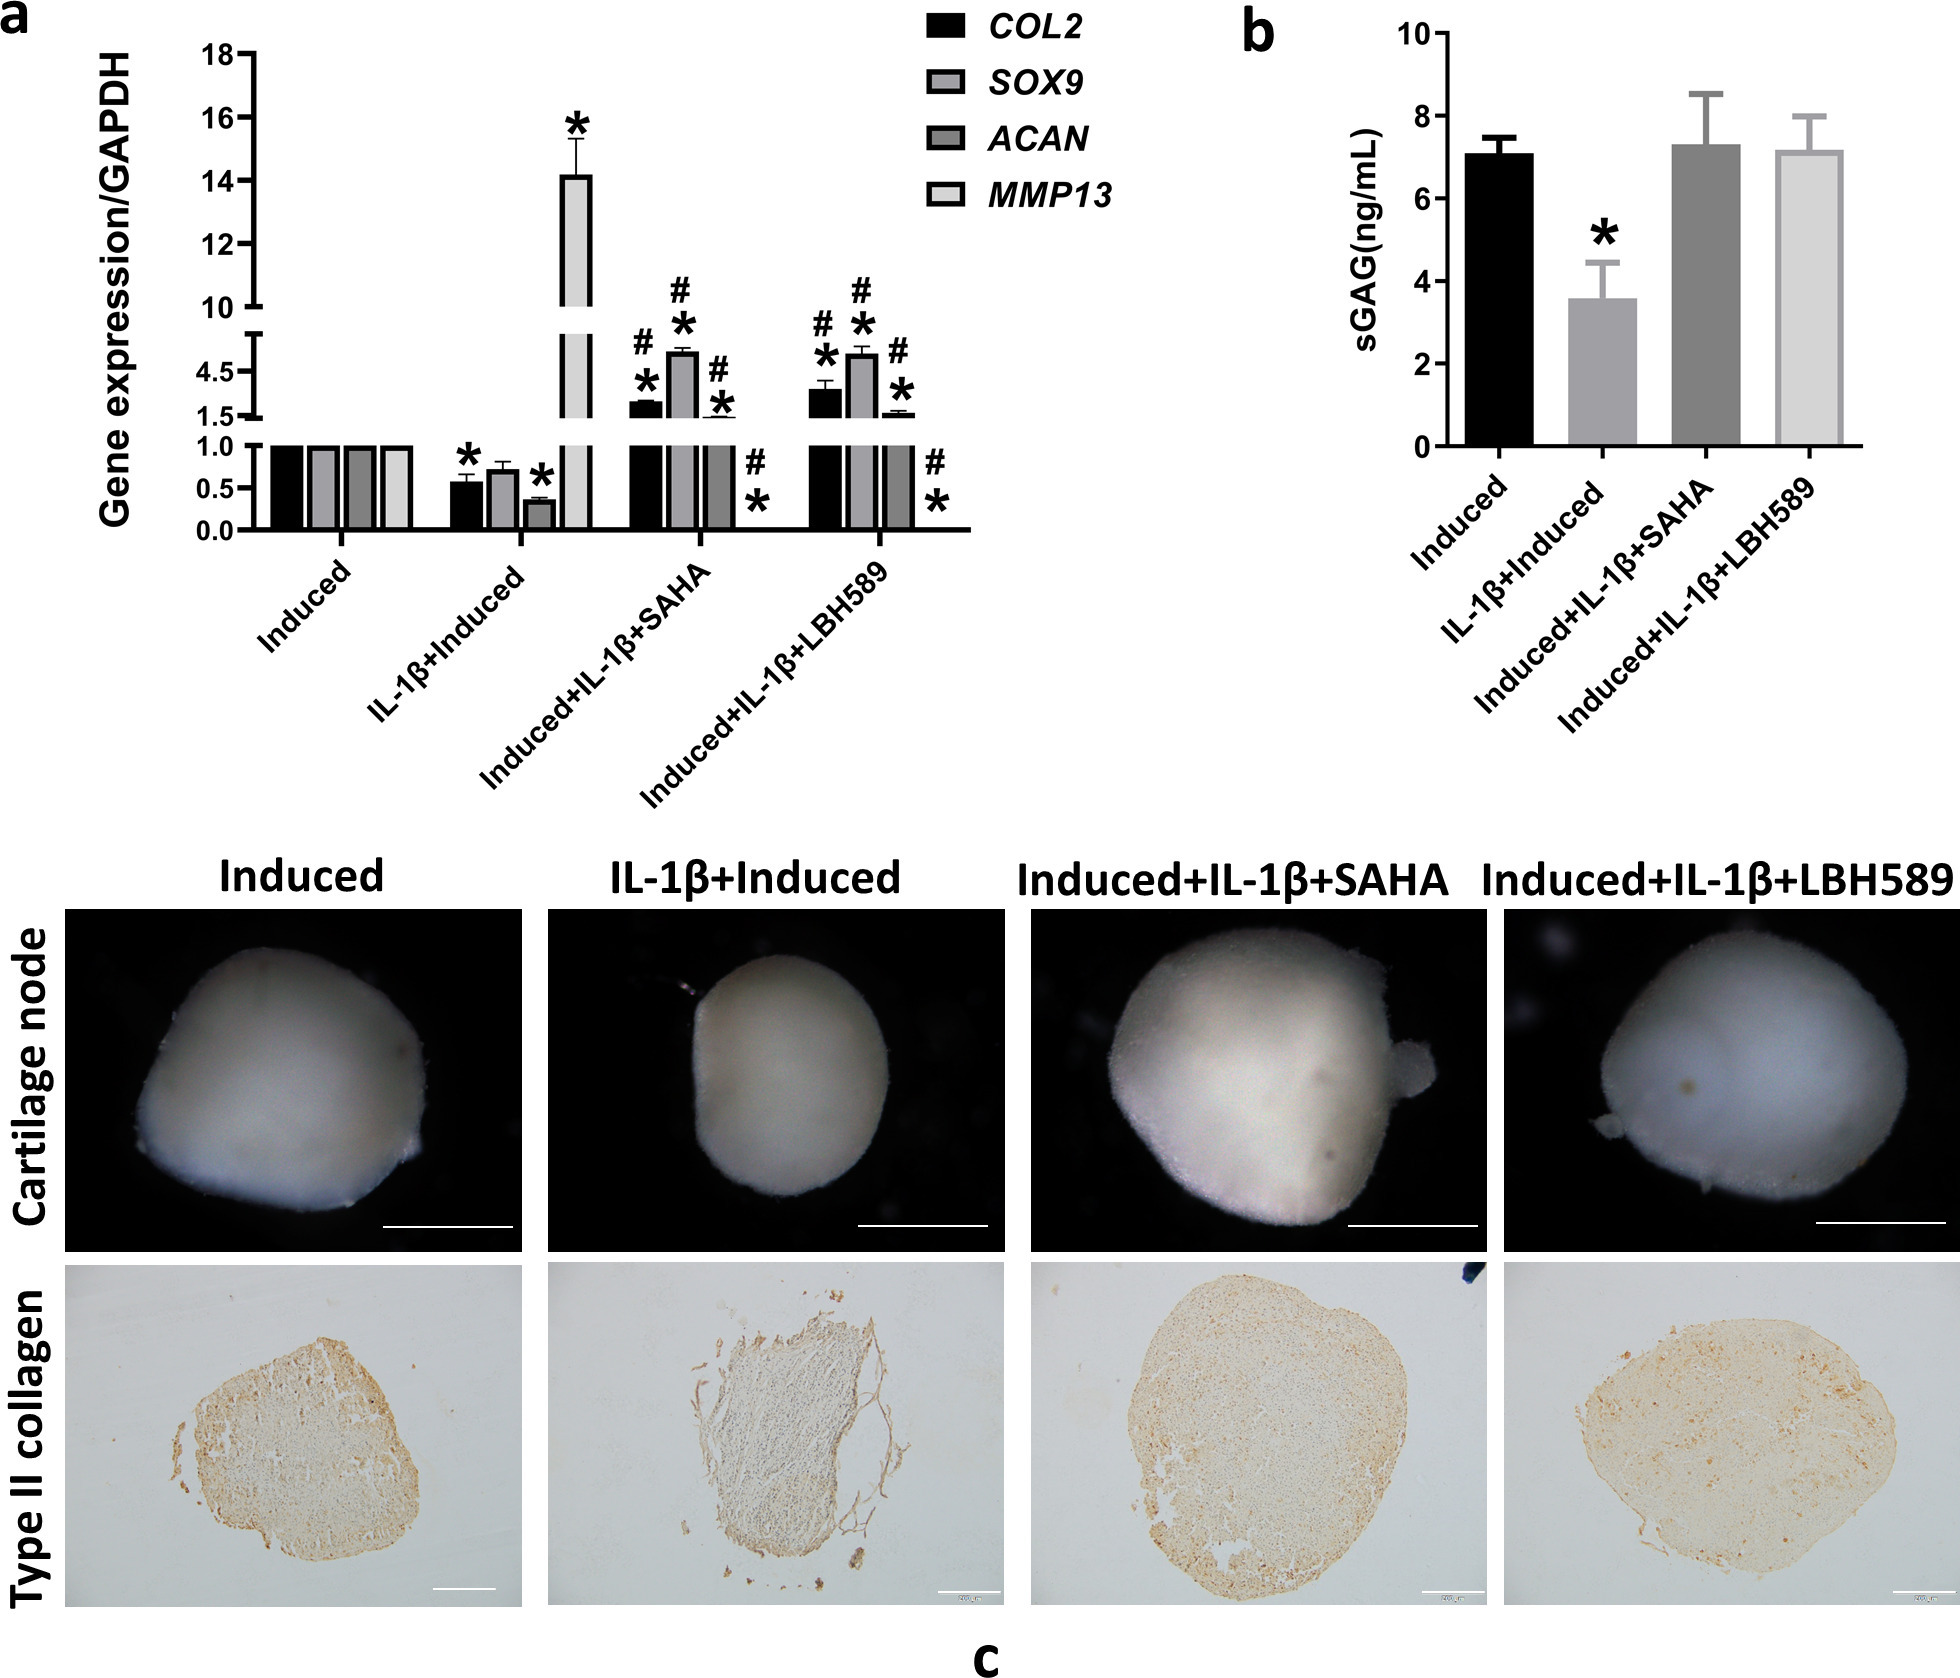 Fig. 2 
            Histone deacetylase (HDAC) inhibitor reverses interleukin (IL)-1β-induced inhibition of synovium-derived mesenchymal stem cell (SMSC) chondrogenesis. a) Messenger RNA expression of type II collagen (COL2), SRY-box transcription factor 9 (SOX9), aggrecan (ACAN), and matrix metalloproteinase 13 (MMP13) using reverse transcription-quantitative polymerase chain reaction (RT-qPCR) after SMSCs were co-treated with 10 ng/ml IL-1β and 10 μM suberoylanilide hydroxamic acid (SAHA) or 3 μM LBH589 during chondrogenic induction. b) Soluble sulphated glycosaminoglycan (sGAG) in culture supernatant, as determined by enzyme-linked immunosorbent assay. c) The size of cartilage pellets by stereoscopic microscope observation. Scale bar = 0.5 mm. Type II collagen immunochemical staining of cartilage pellet sections. Scale bar = 100 μm. *p < 0.05 compared to the chondrogenic induced group. #p < 0.05 compared to the chondrogenic induced group with IL-1β treatment. One-way analysis of variance was used to determine the p-values. Least-Significant Difference (LSD) test was used to analyze data with homogeneous variances, and Games-Howell test was used for data with non-homogeneous variances. GAPDH, glyceraldehyde-3-phosphate dehydrogenase.
          